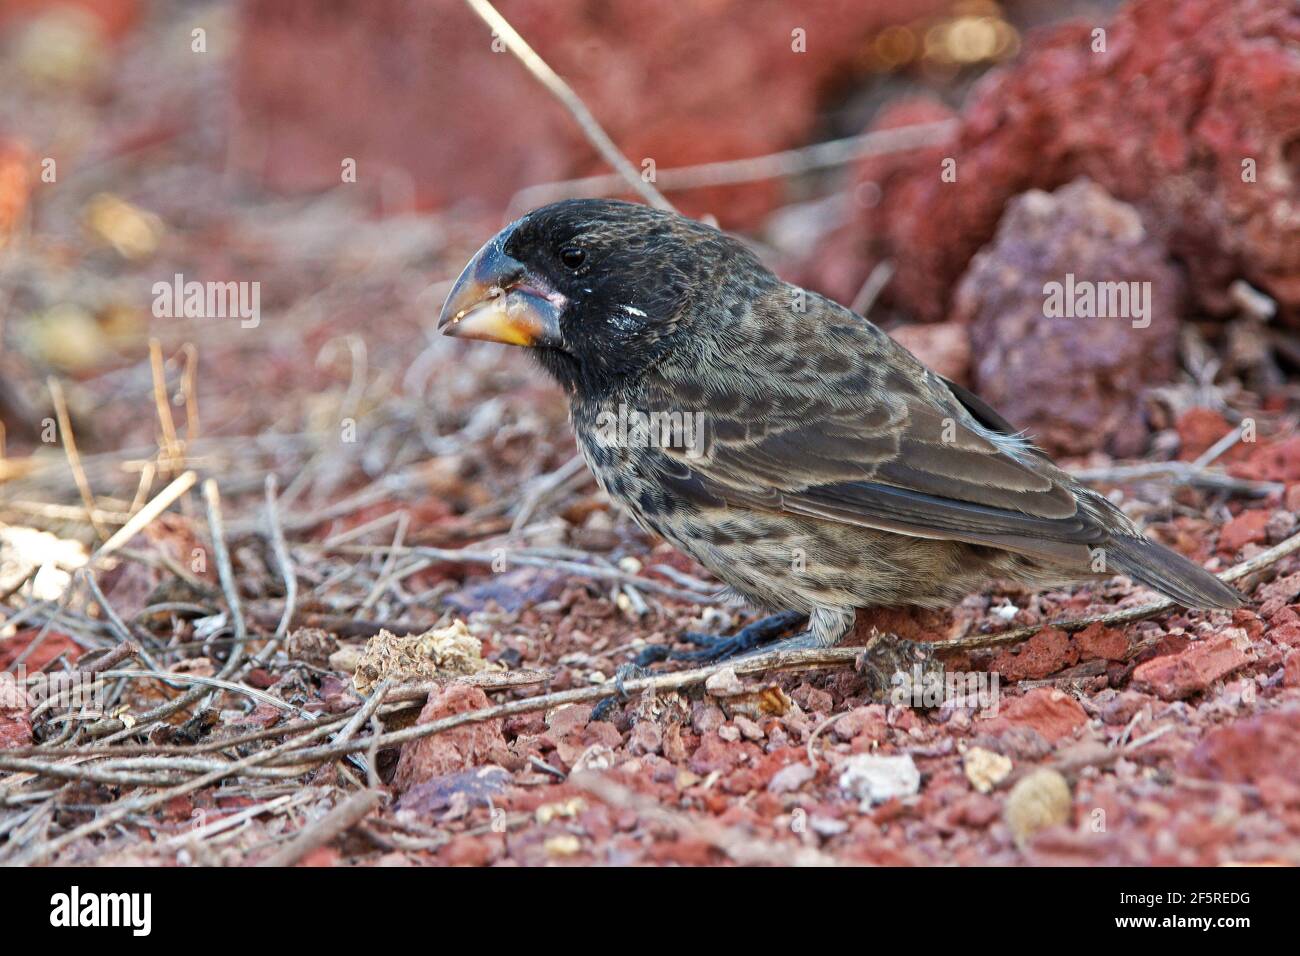 Large ground finch in Galapagos islands Stock Photo